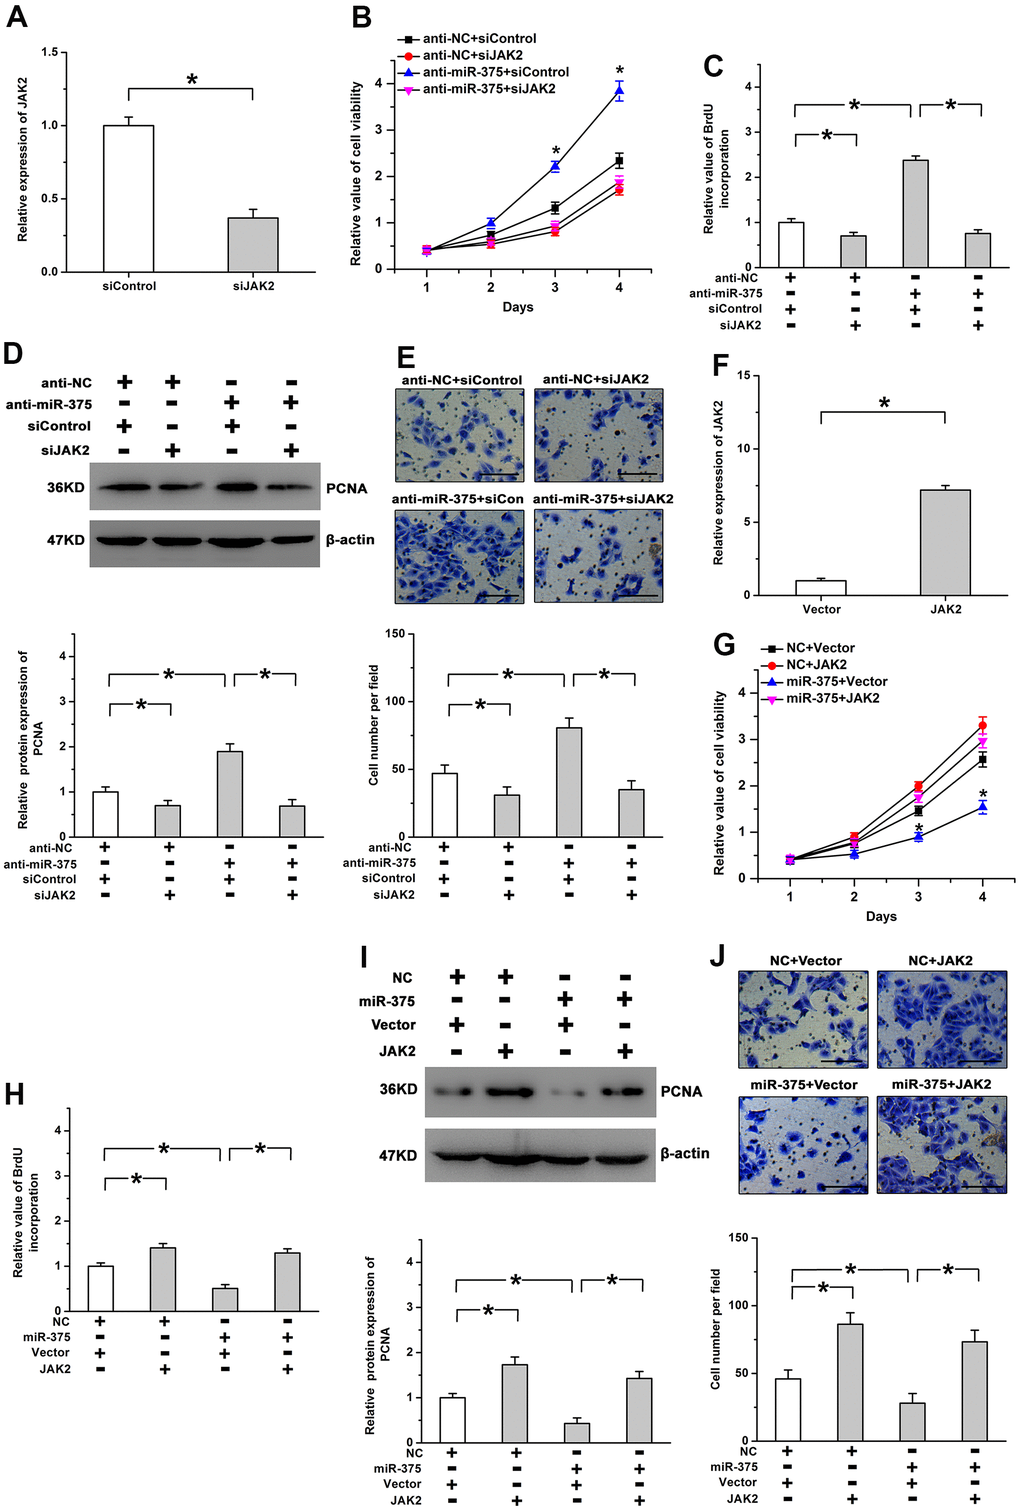 Effects of miR-375 on cell proliferation are mediated by JAK2. (A) Expression of JAK2 was significantly decreased by siJAK2. (B) The increased cell viability induced by anti-miR-375 was mitigated by Jak2 knockdown. * P C, D) Knockdown of JAK2 attenuated the promoting effects of anti-miR-375 on BrdU incorporation (C) and PCNA expression (D). (E) Cell migration enhanced by anti-miR-375 was inhibited by JAK2 knockdown. Scale bar: 100 μm. (F) Expression of JAK2 was increased by the transfection with a recombinant plasmid. (G, H) miR-375-mitigated cell viability (G) and BrdU incorporation (H) was reversed by the reintroduction of JAK2. * P I, J) The inhibitory effects of miR-375 on PCNA expression (I) and cell migration (J) were attenuated by the restoration of JAK2 expression. Scale bar: 100 μm. All values are represented as the mean ± standard error of the mean. n = 3 per group. *P 